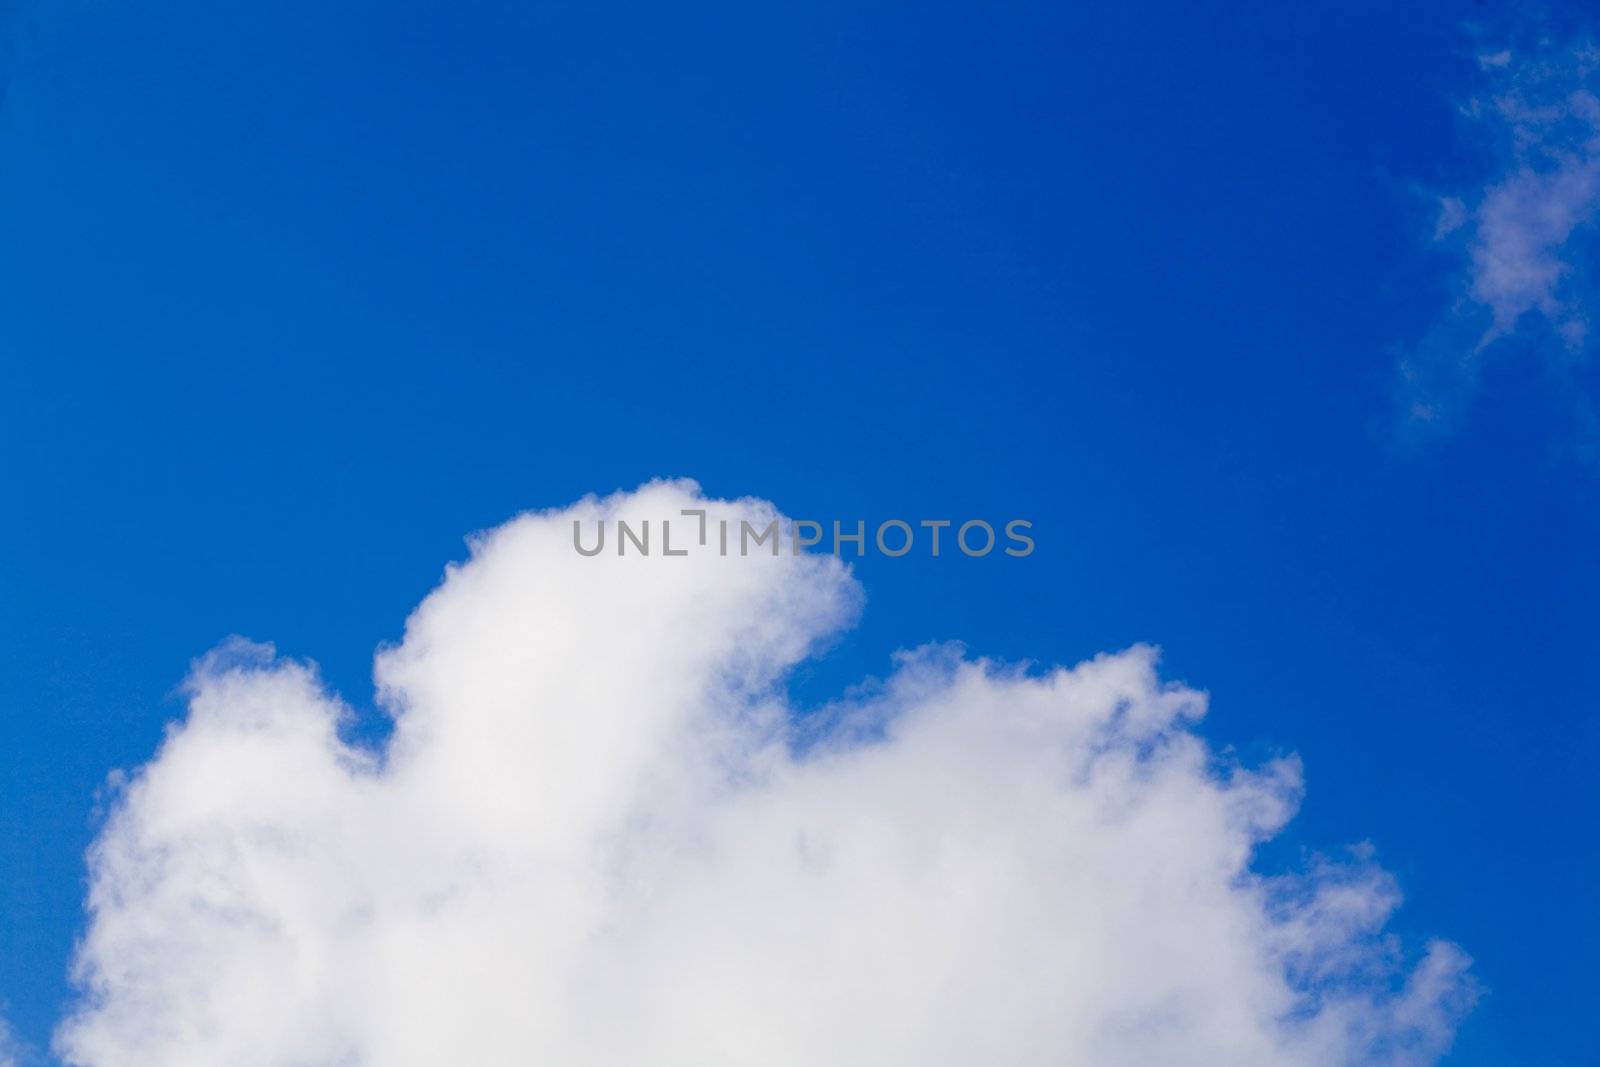 An image of clouds on blue sky